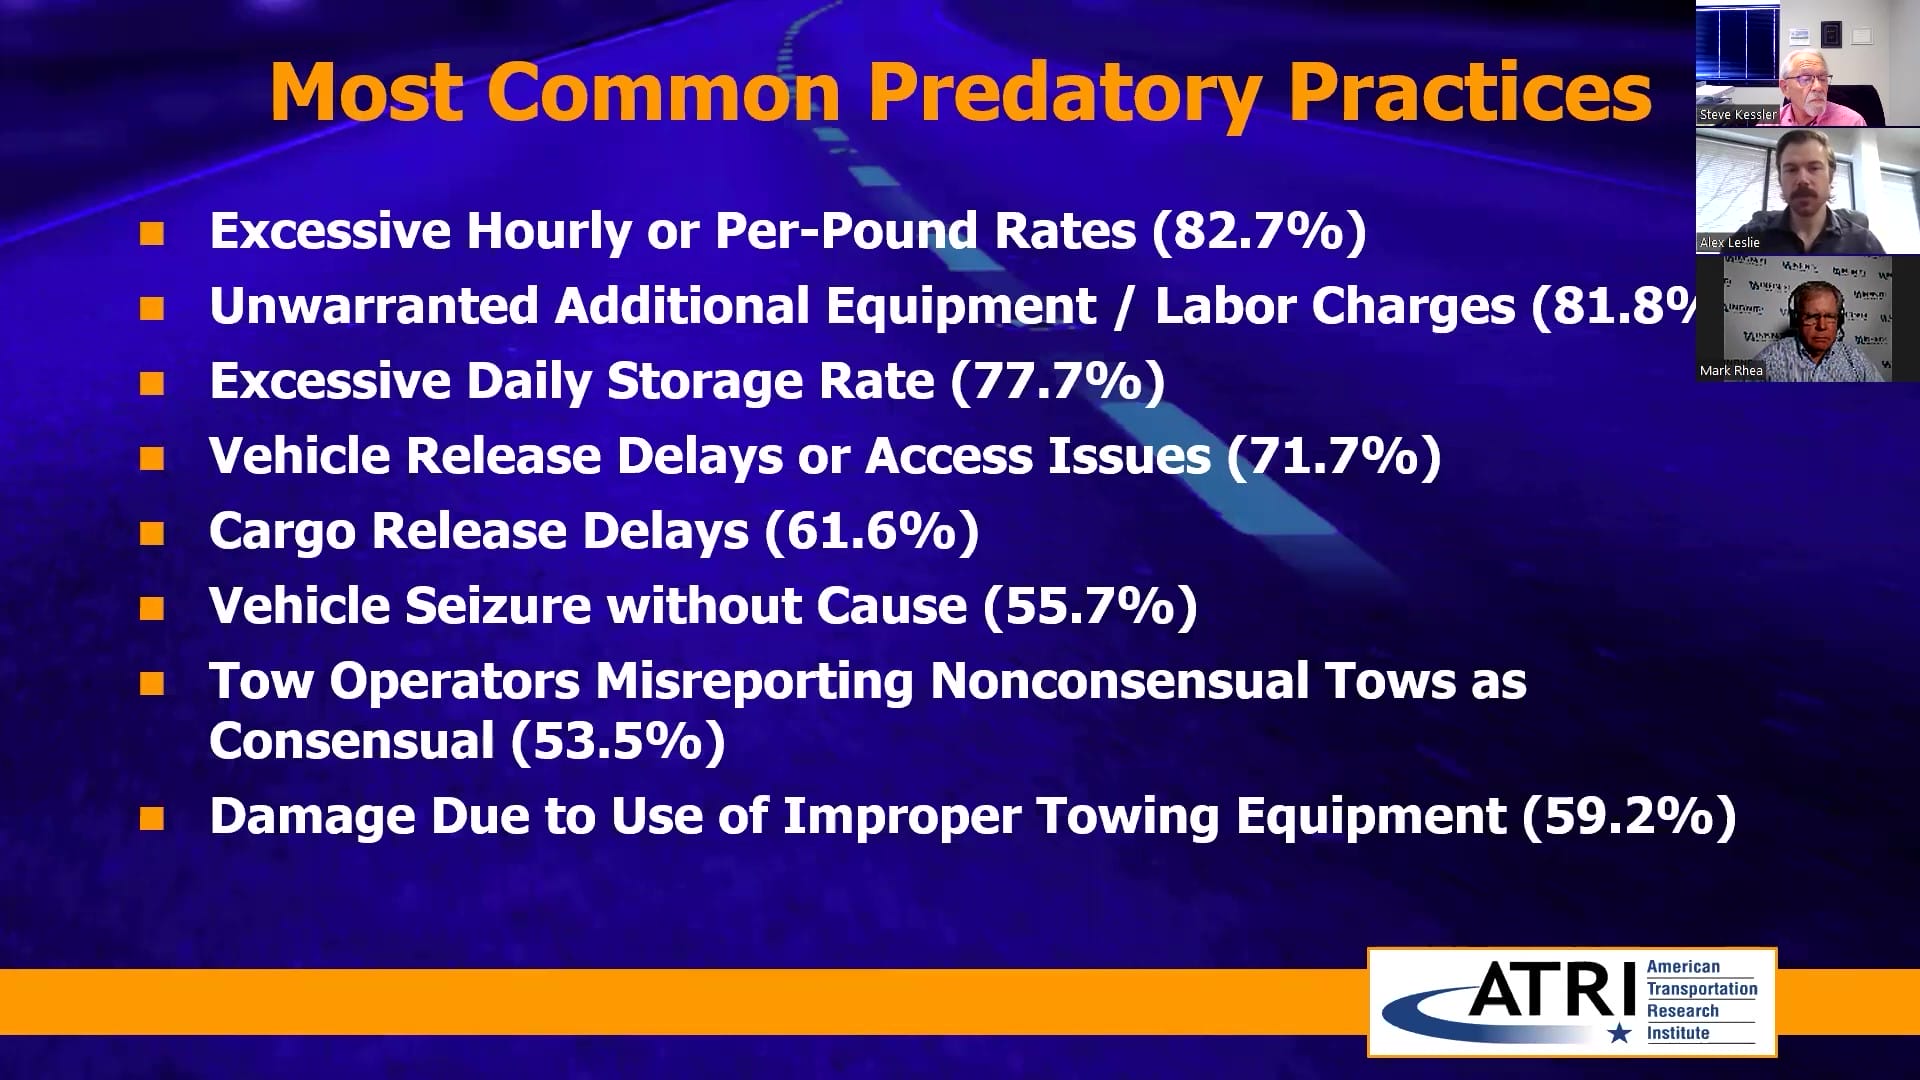 ATRI’s Research on Predatory Towing Most Common Predatory Practices